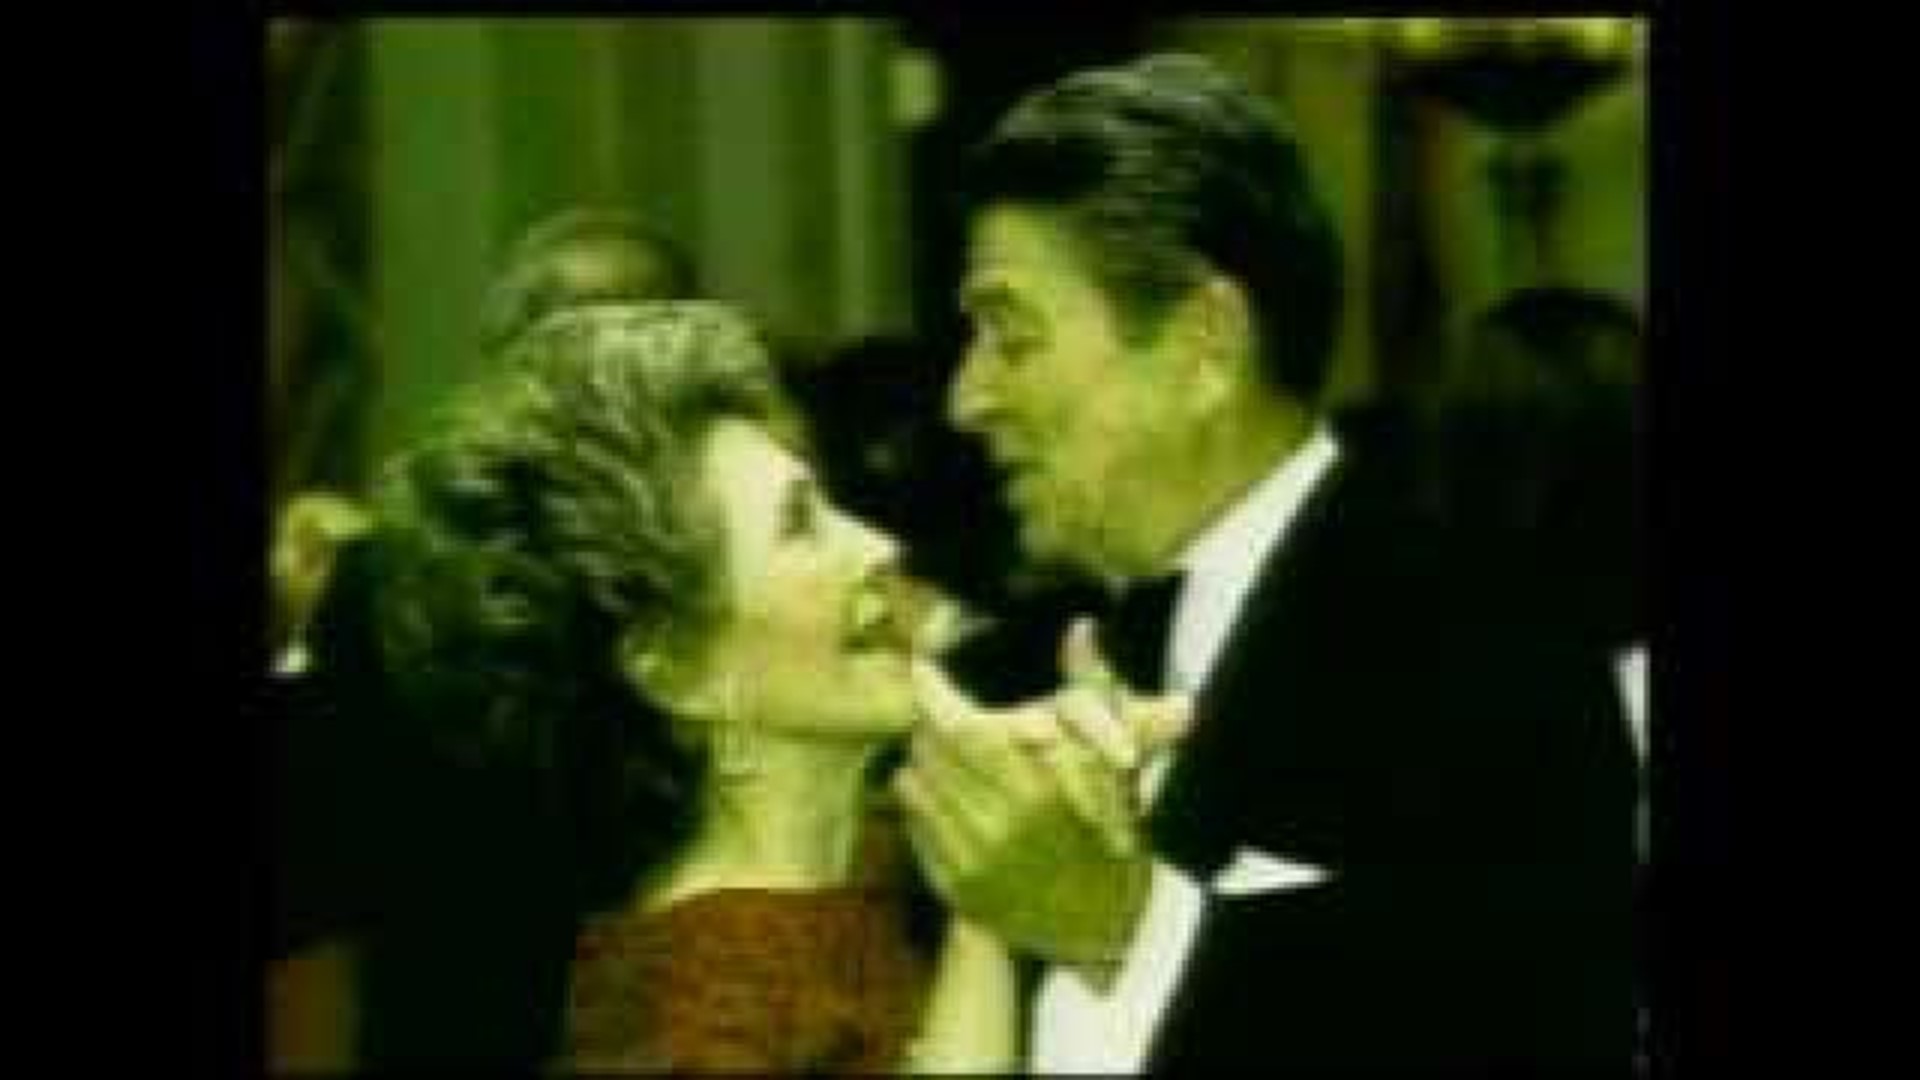 The devotion of Ronald and Nancy Reagan